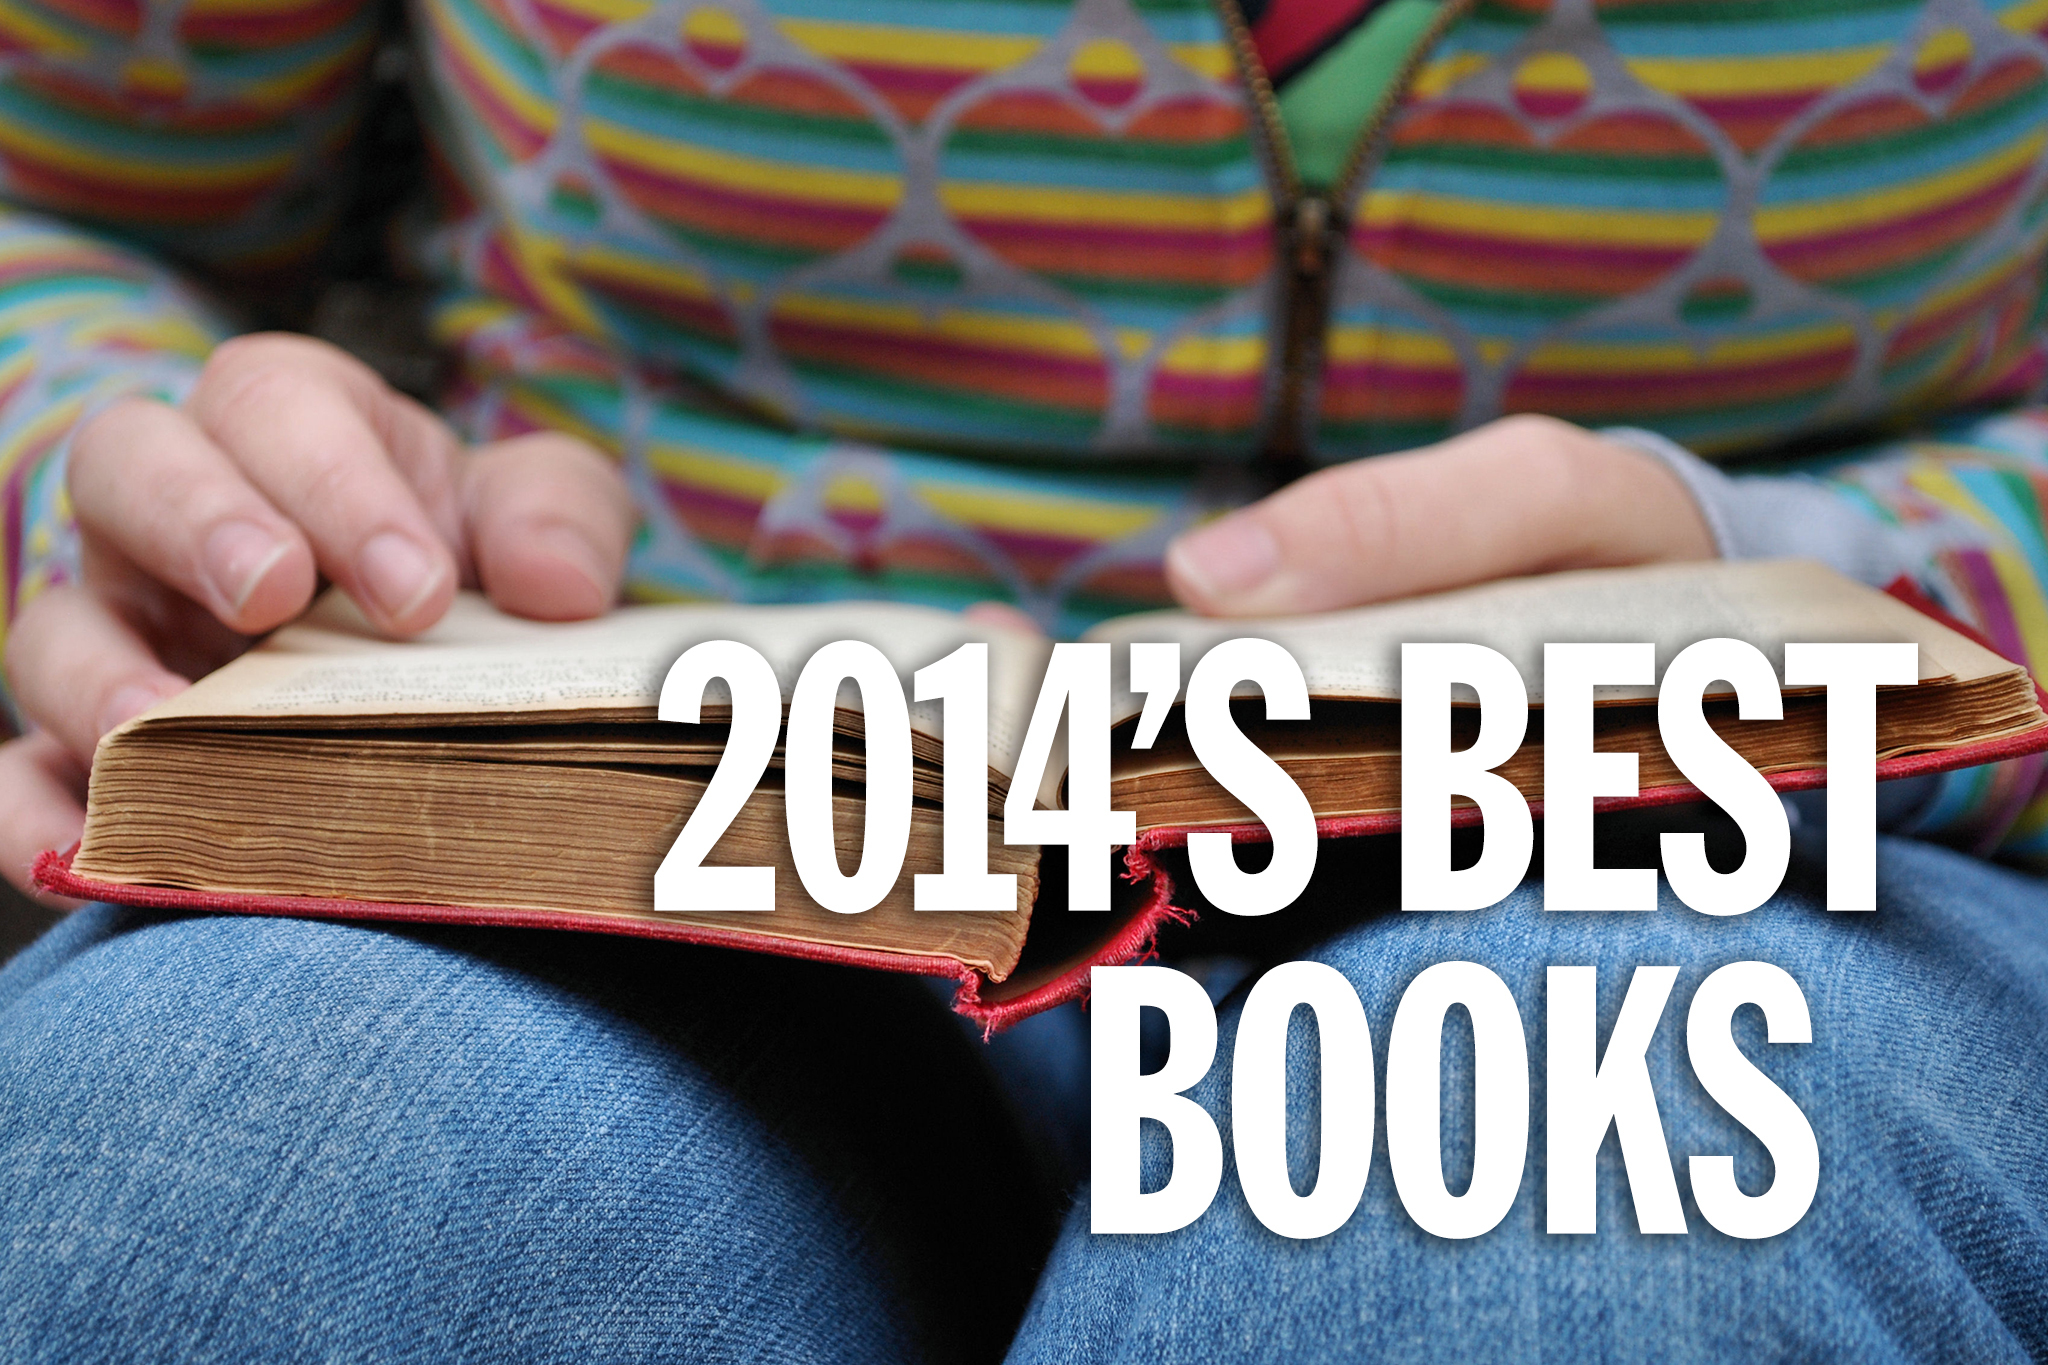 The 10 best books of 2014